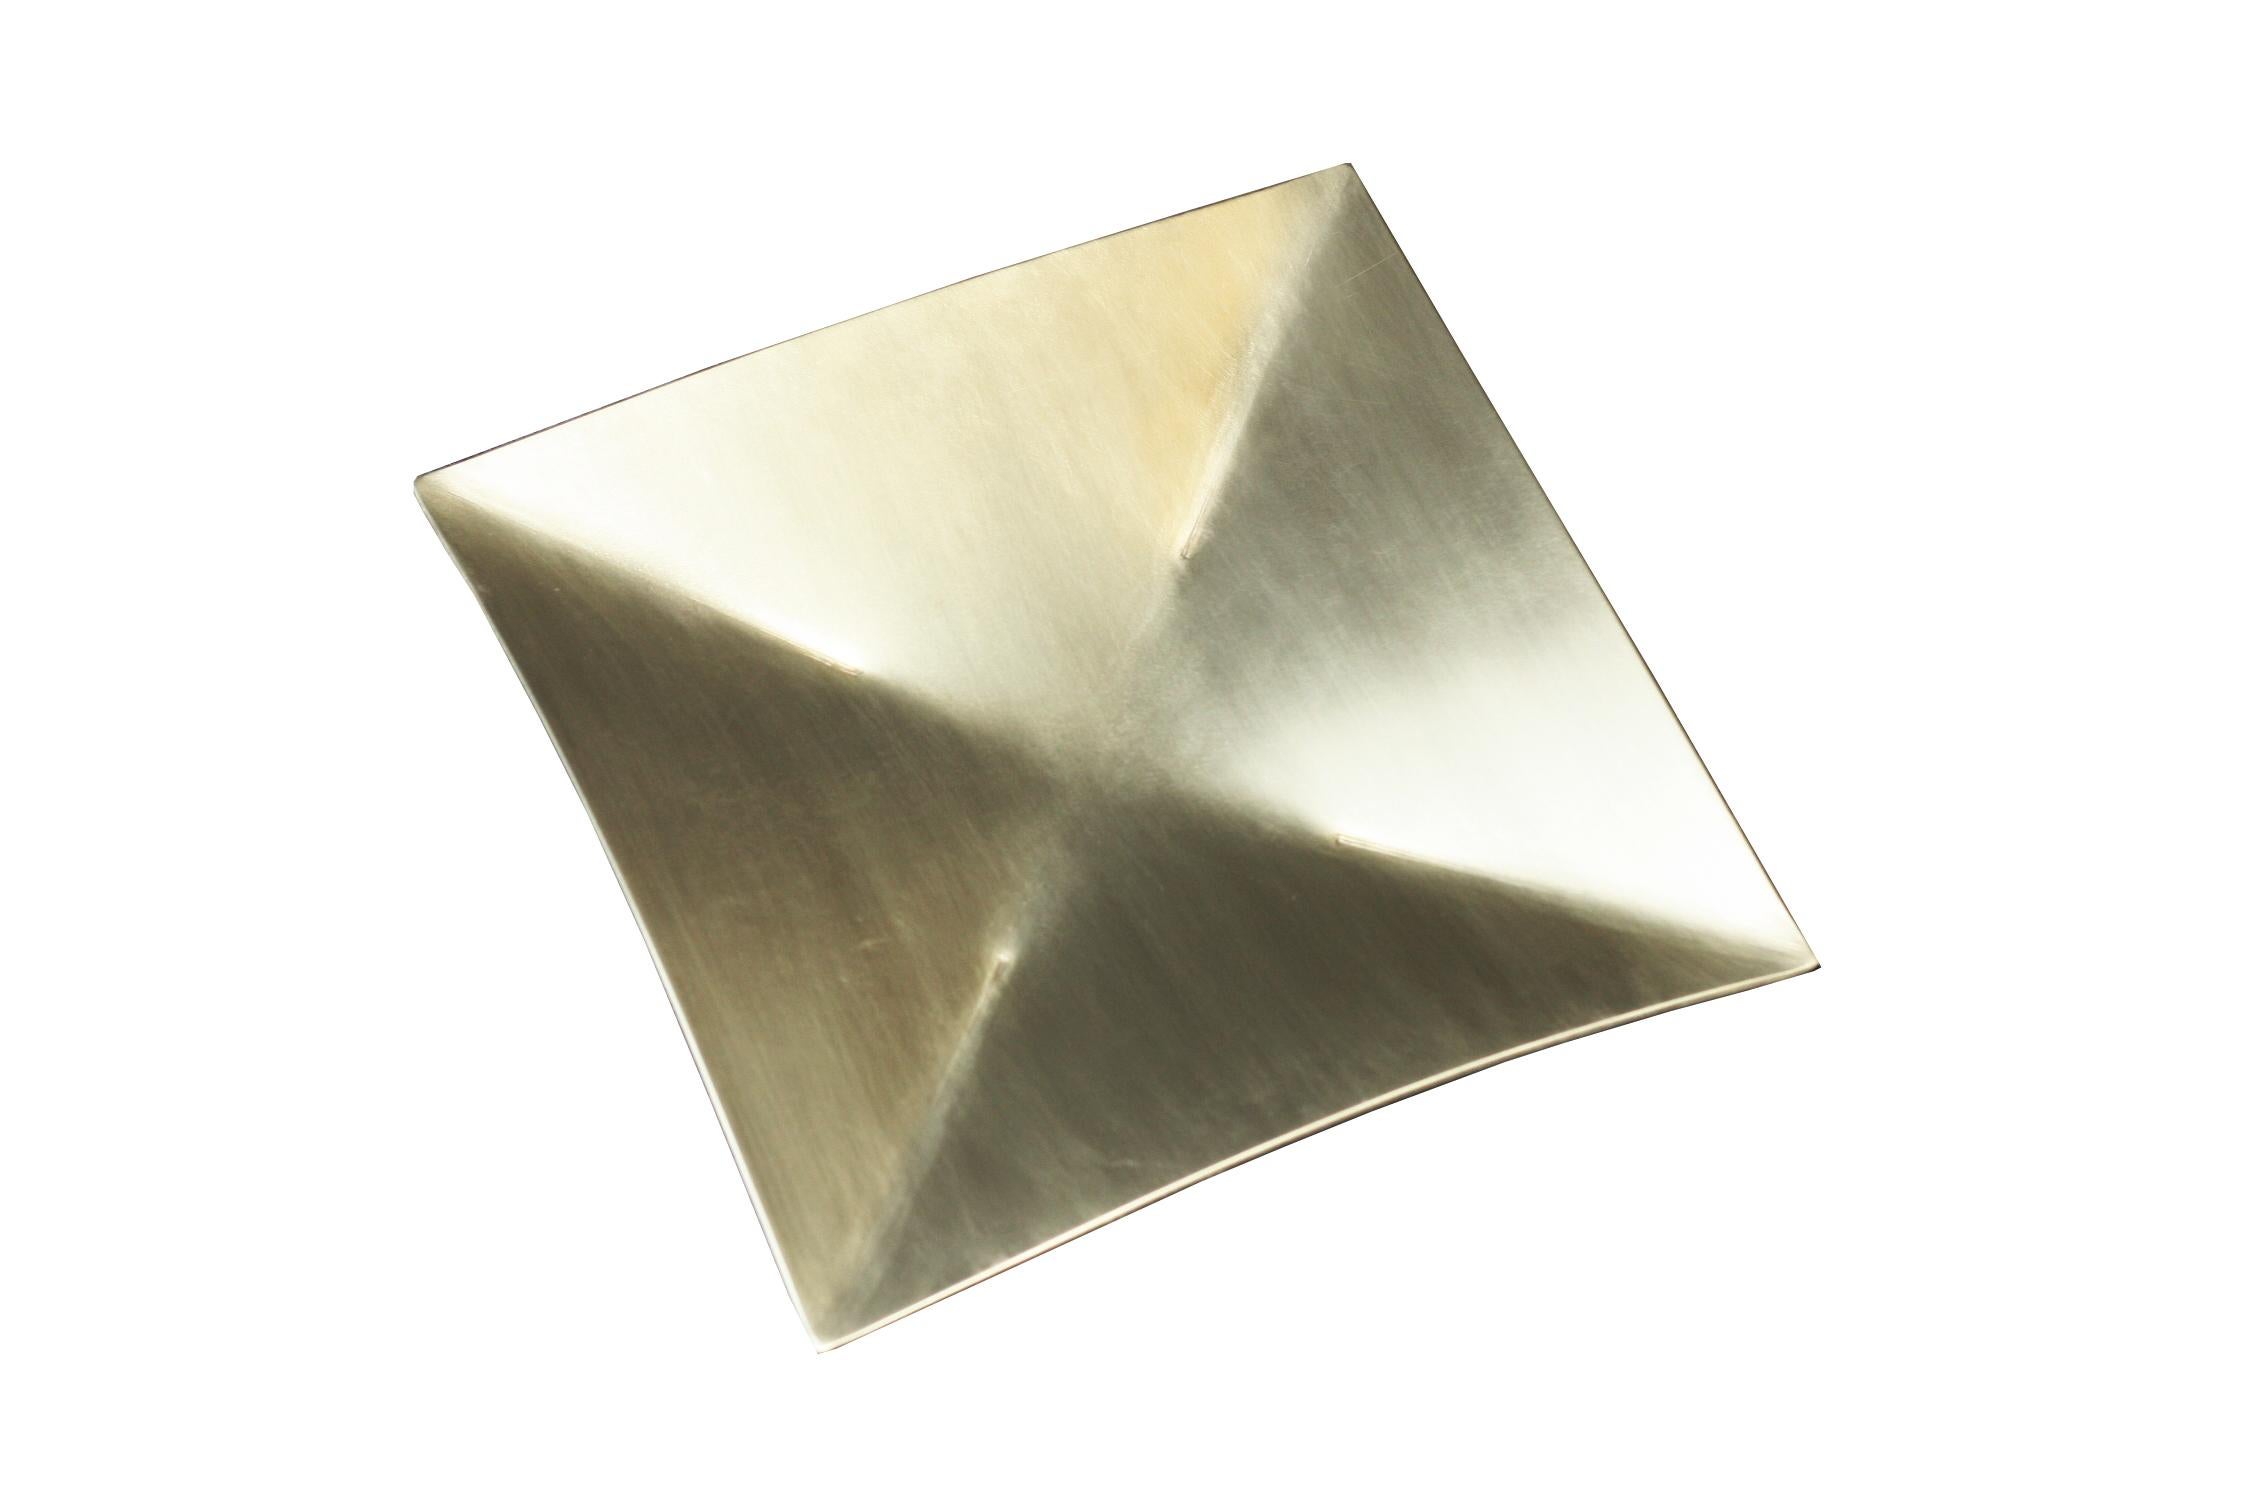 Metal Tray in Raw Waxed Aluminum, Origami Style, Contemporary Design by Mtharu For Sale 1